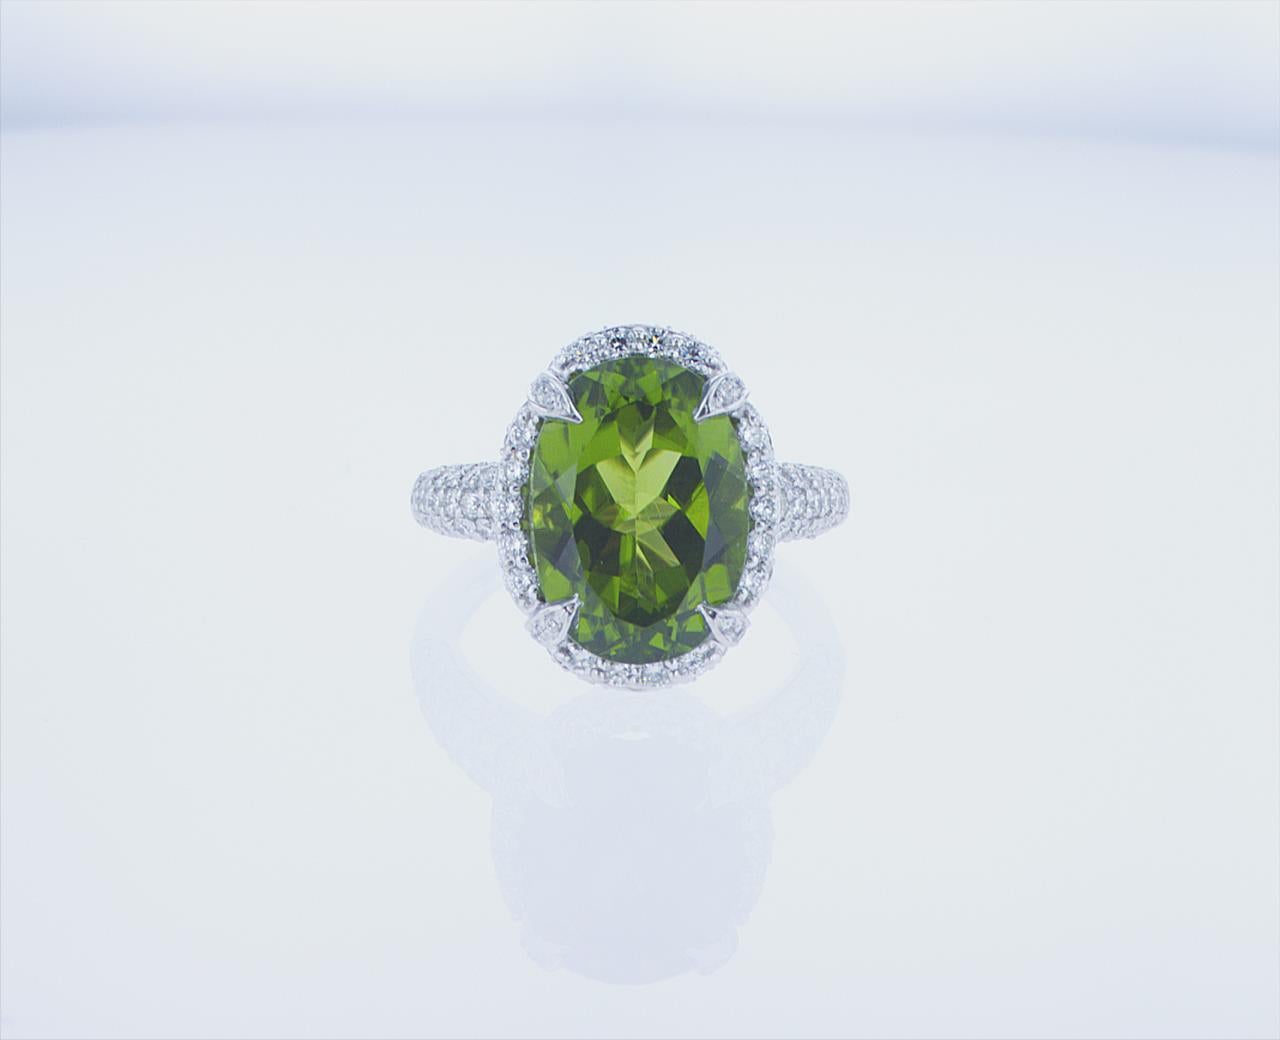 7.05 Carat Oval Peridot cocktail ring in 18k White Gold with Palladium. Featuring 1.37 Carats total weight of G/H color, VS clarity Round Brilliant Diamonds.